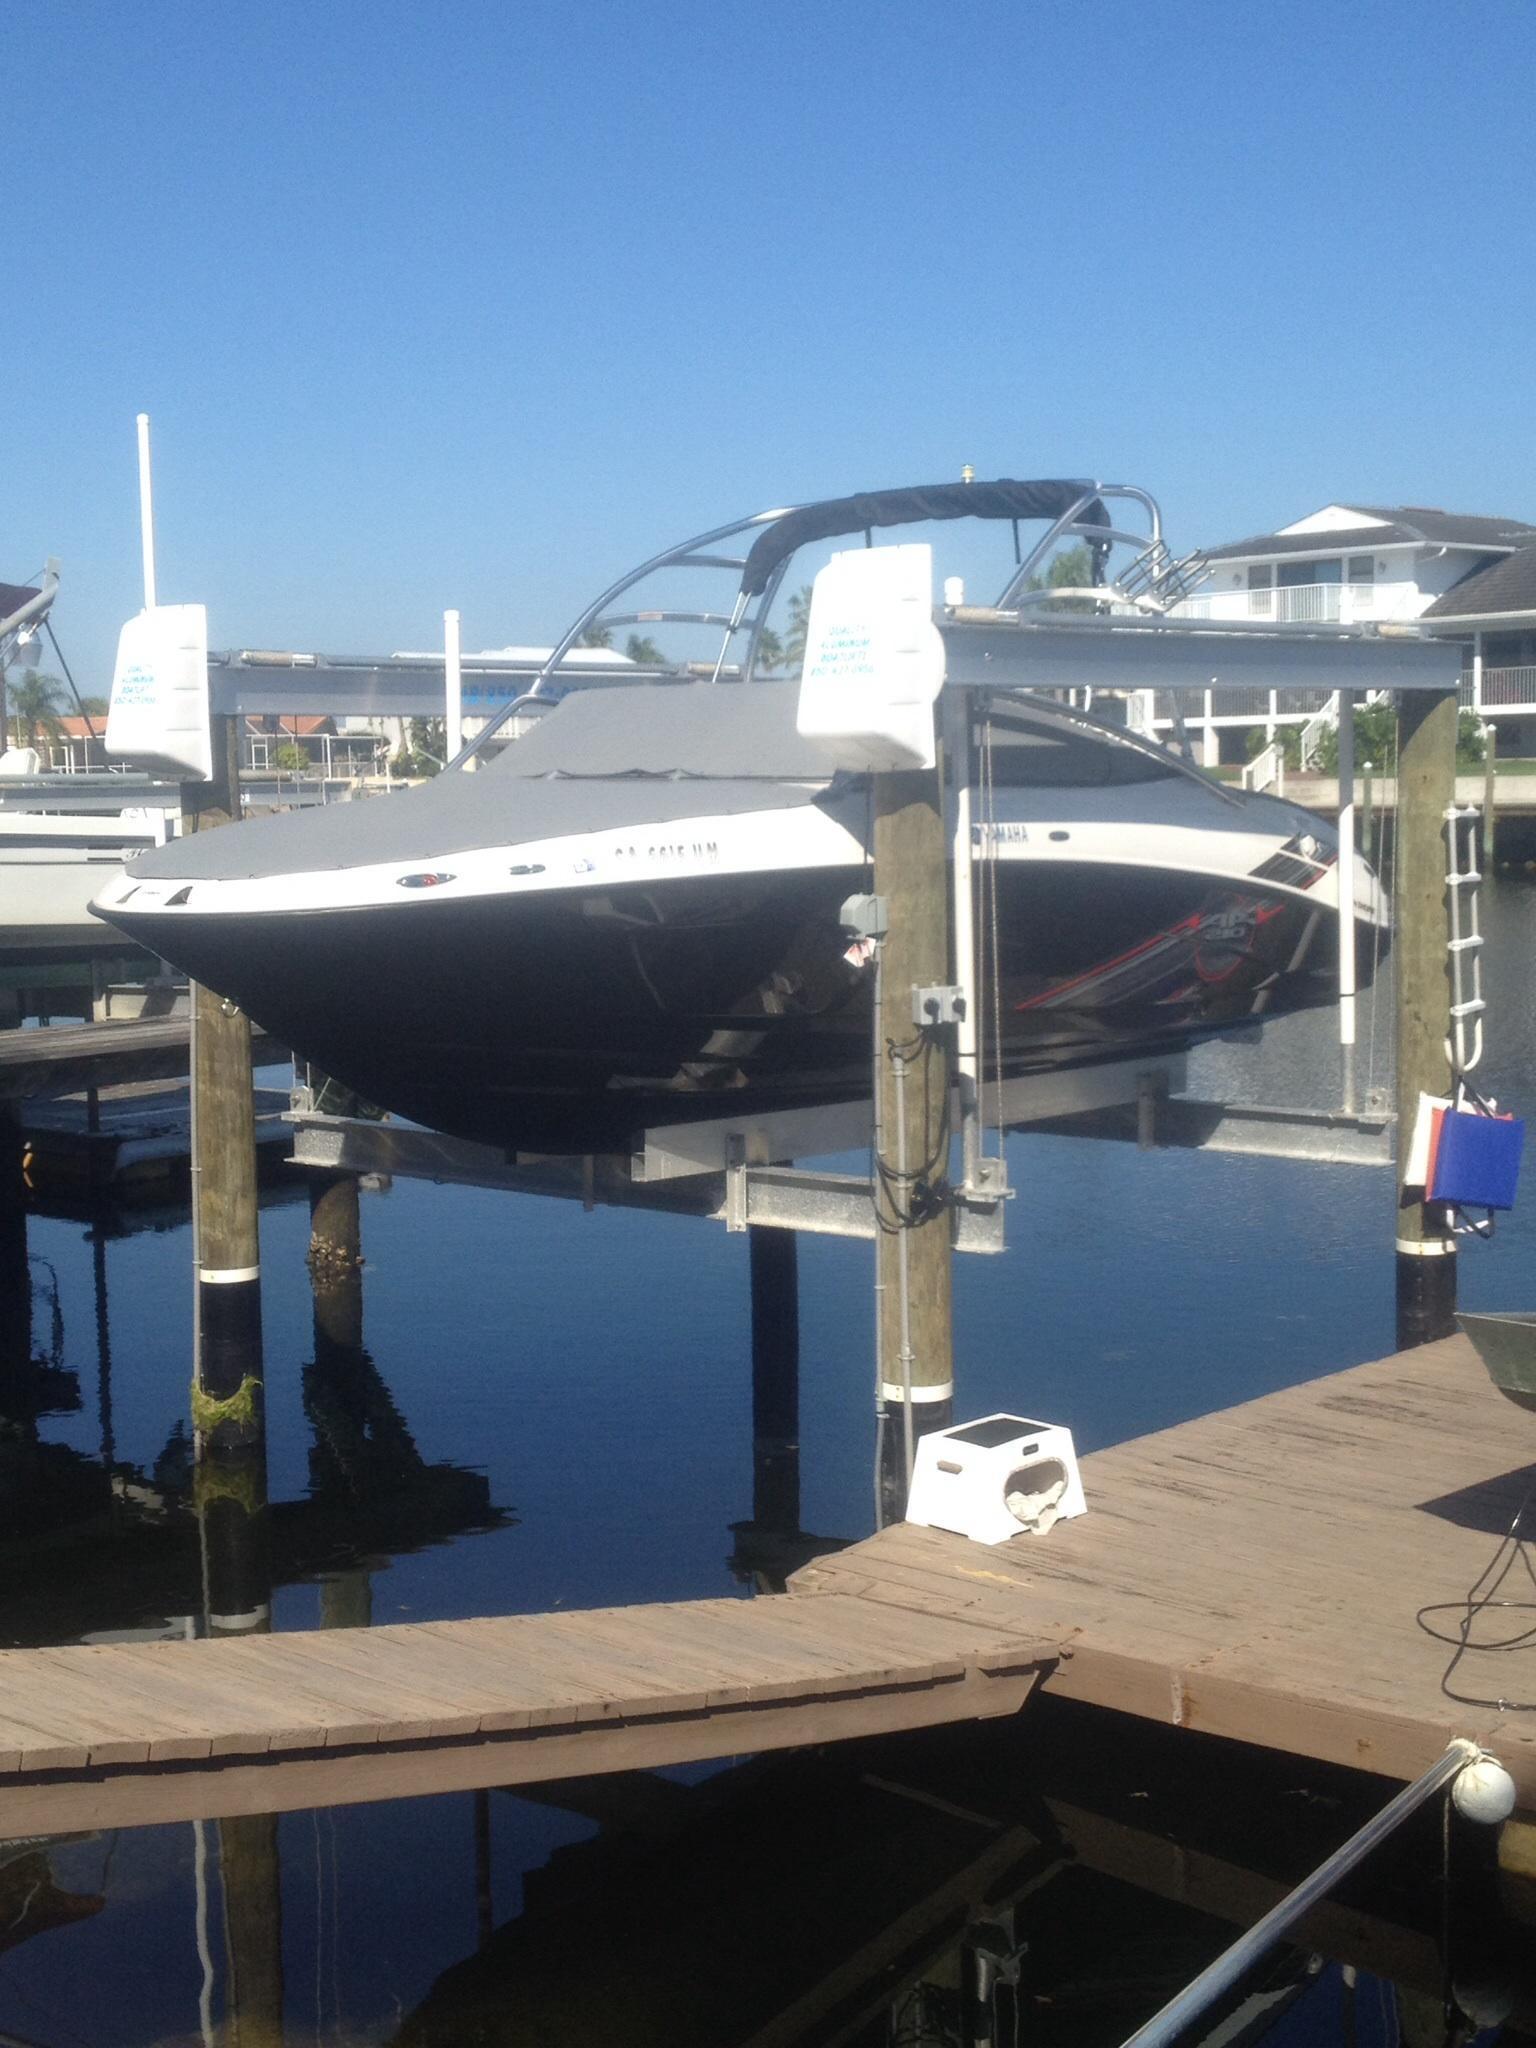 Yamaha Jet Boat 2010 210 AR, Clearwater